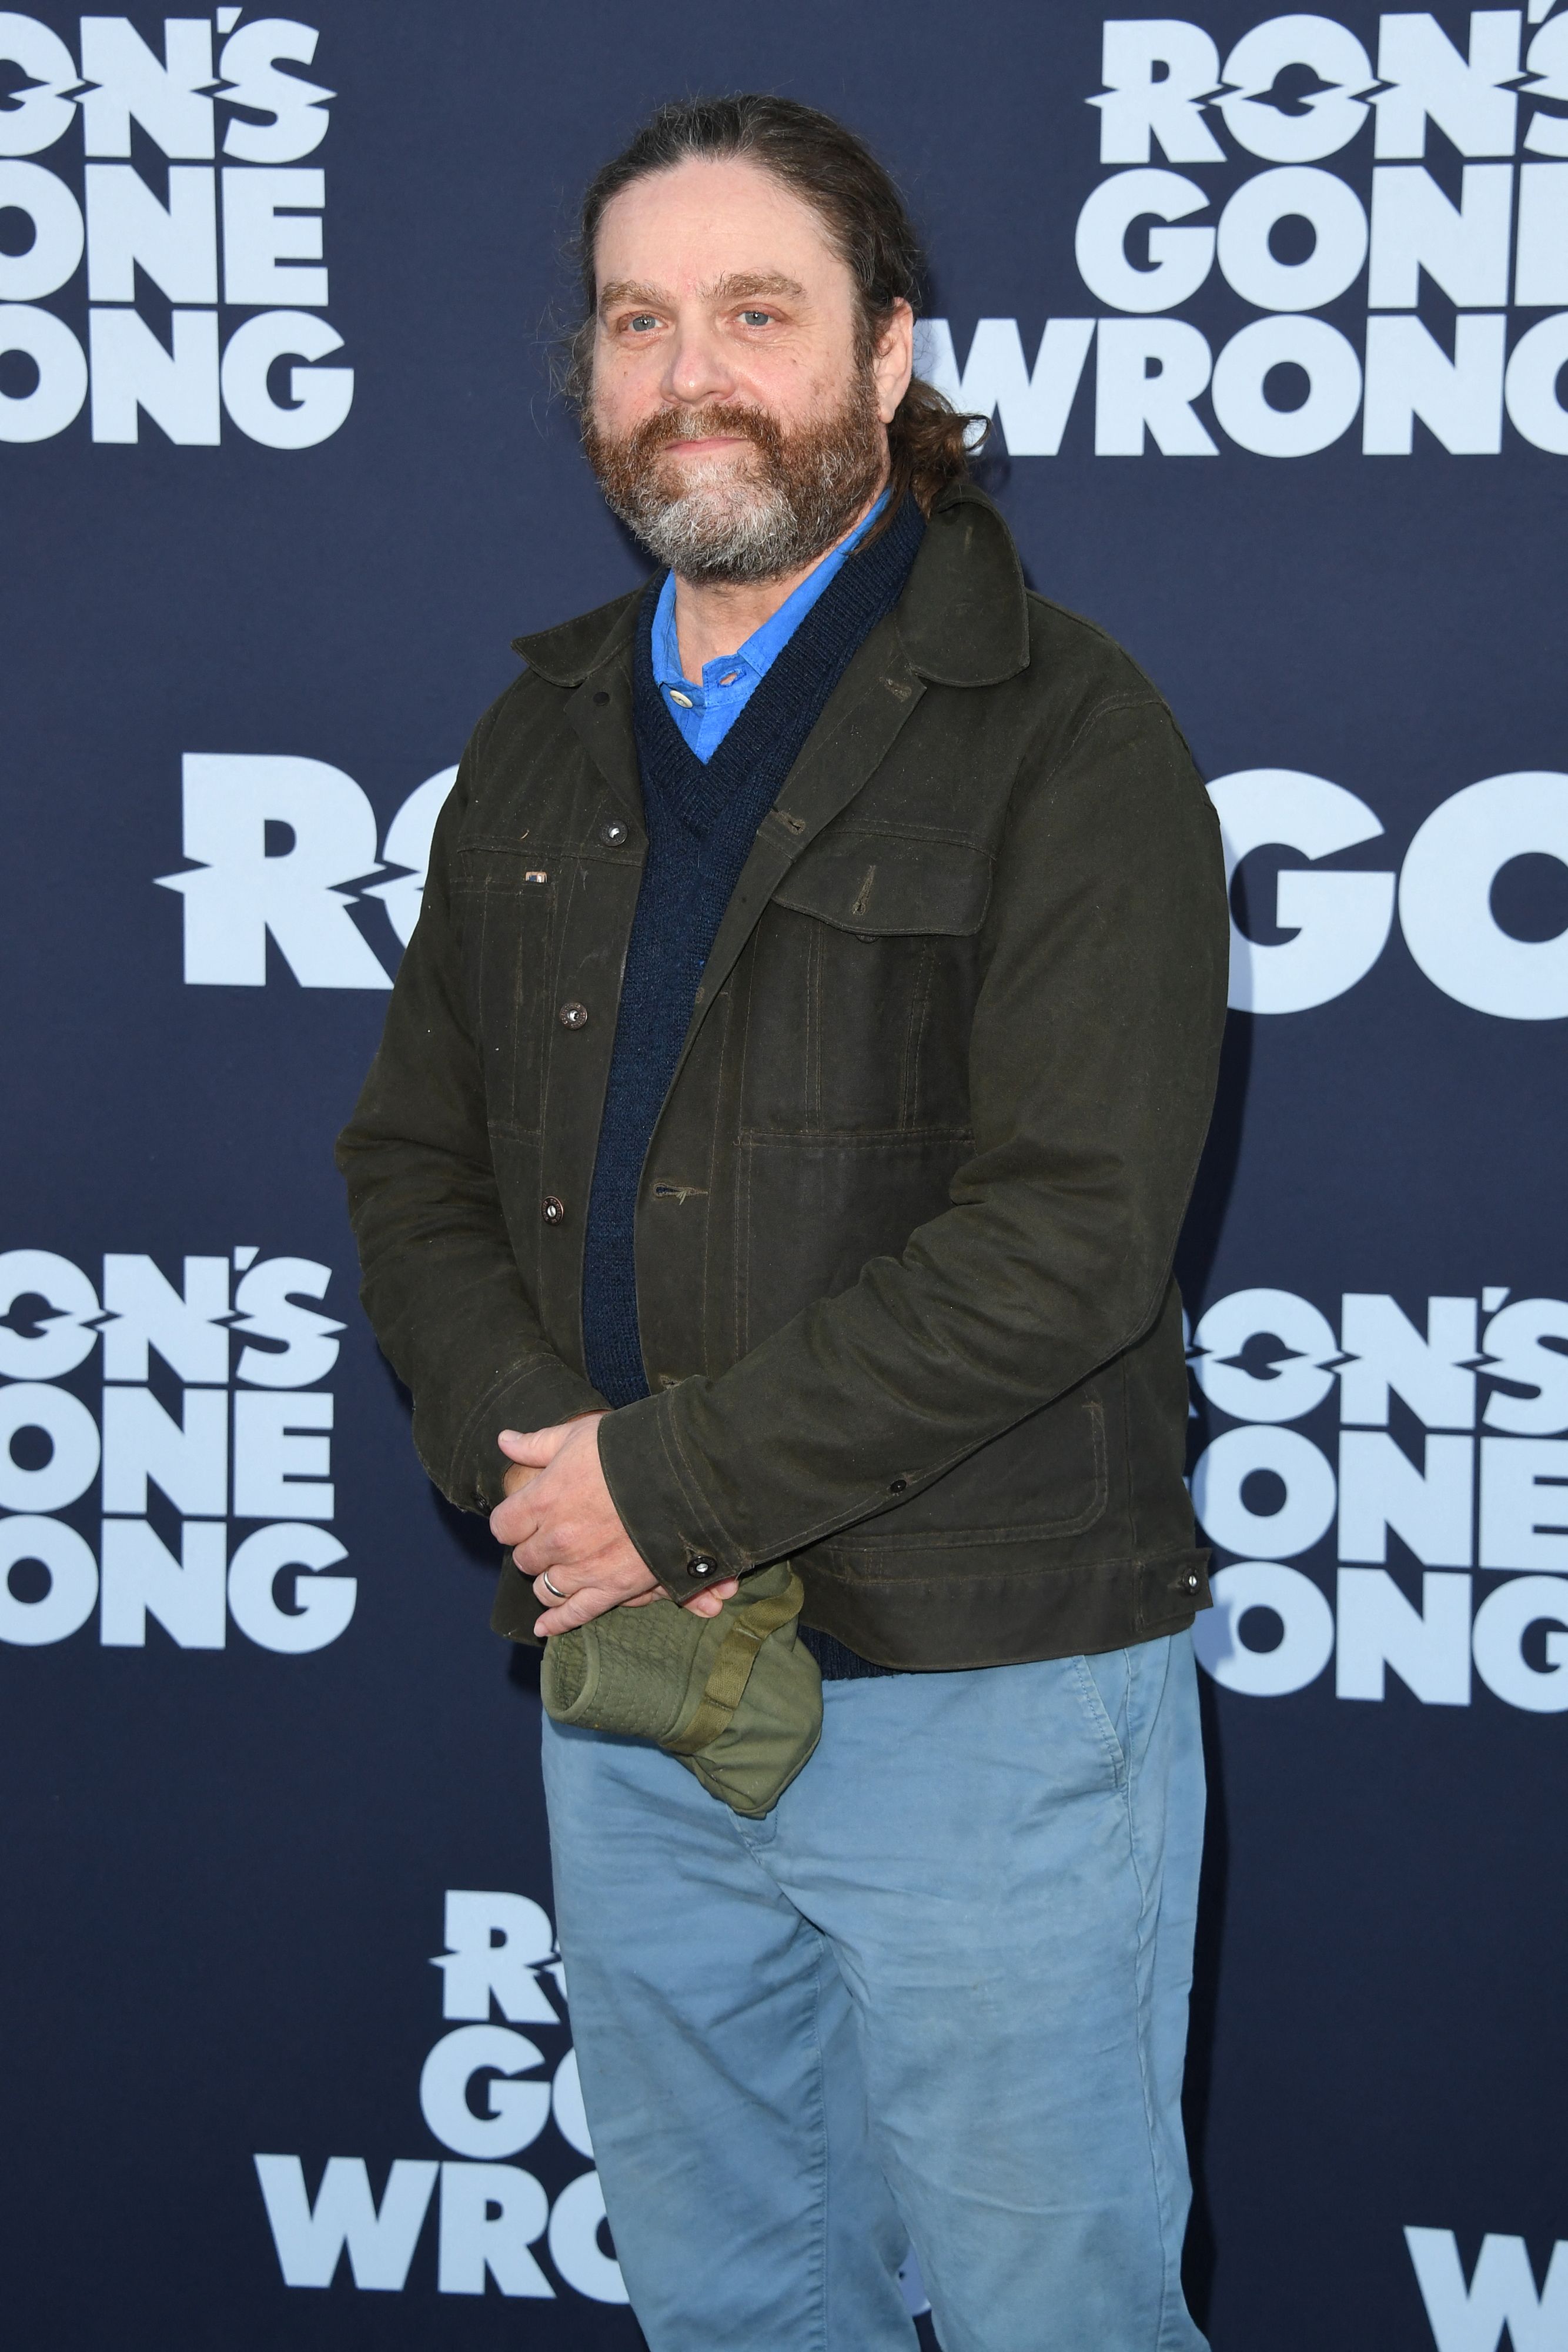 Zach Galifianakis at the premiere of "Ron's Gone Wrong" in Hollywood, California, on October 19, 2021. | Source: Getty Images